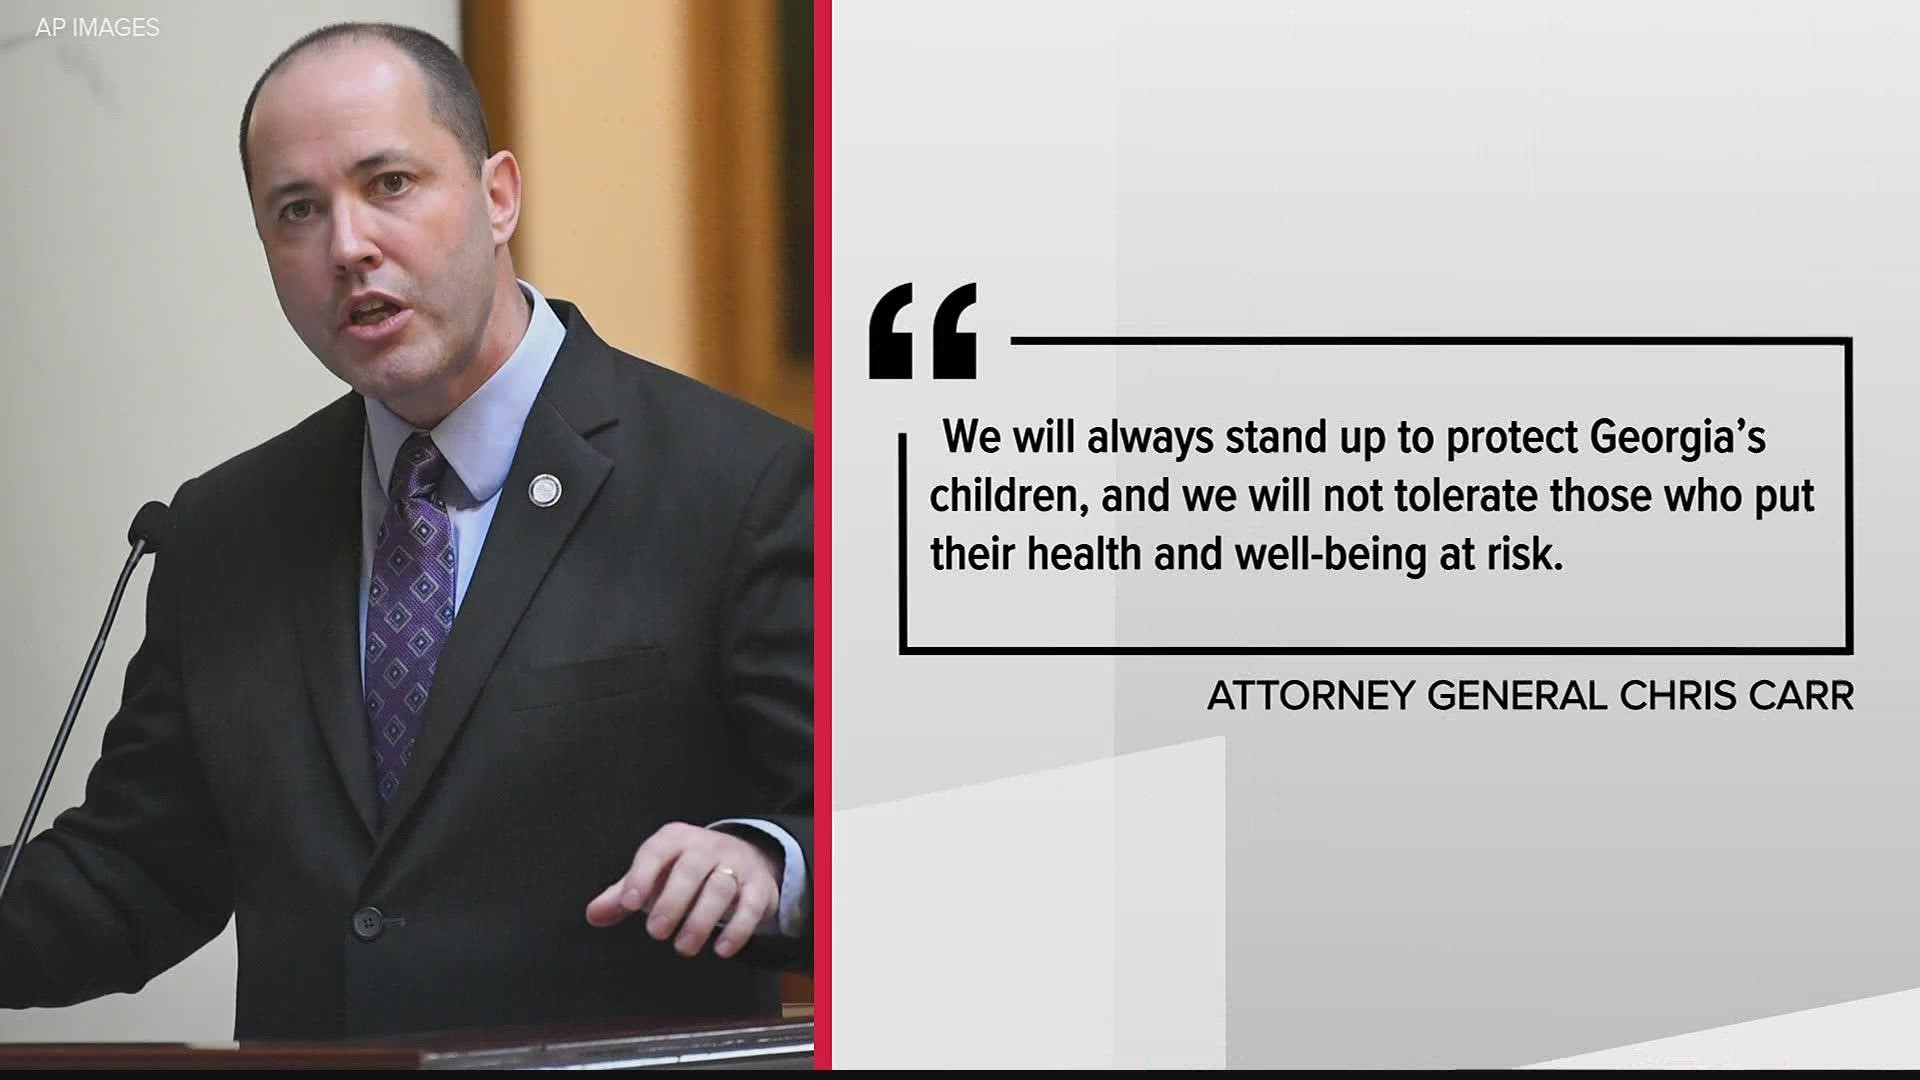 A number of state attorneys general around the country are part of the investigation.